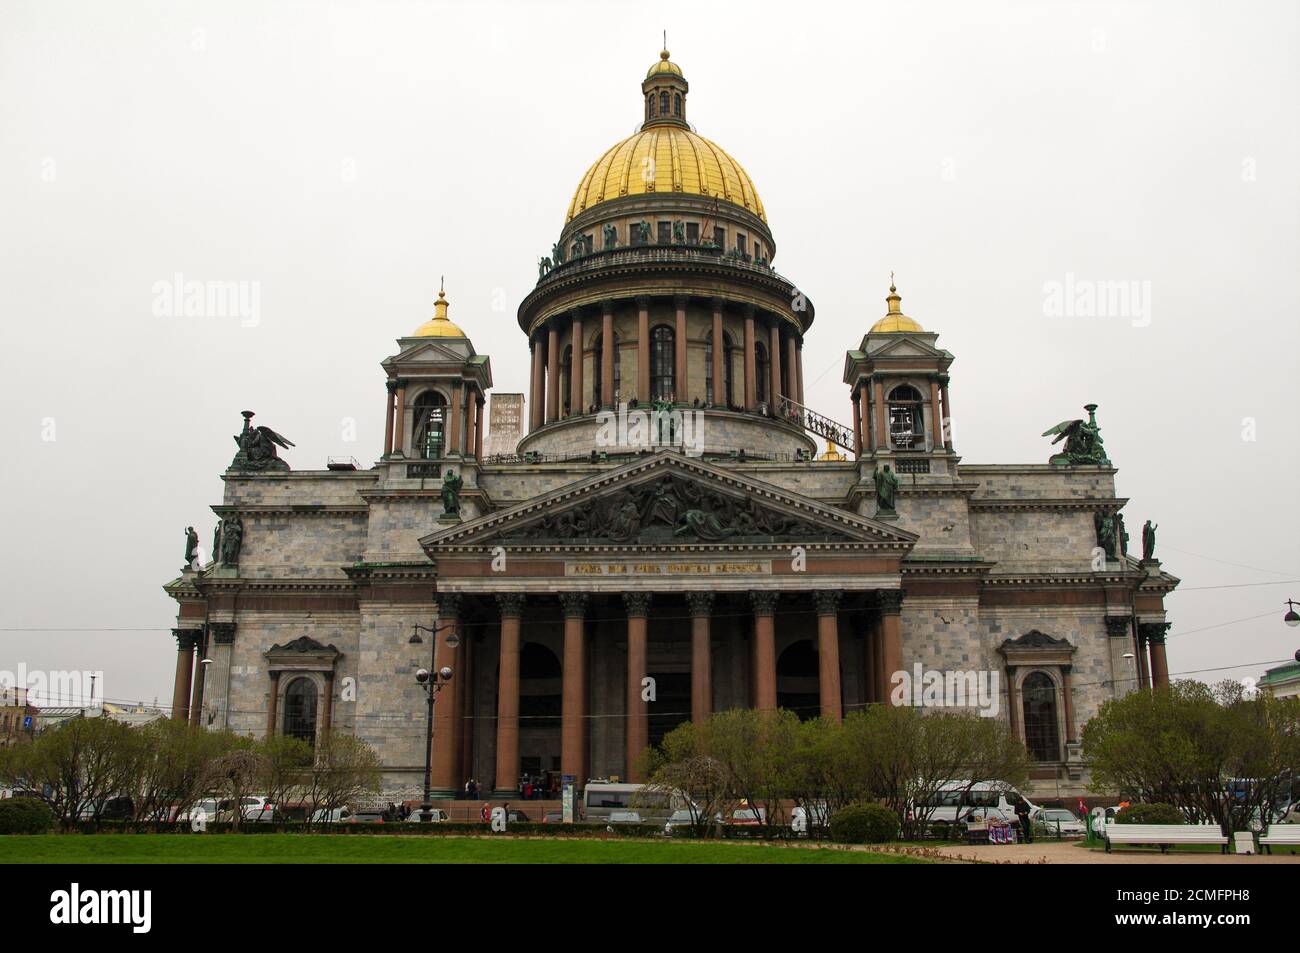 SAINT PETERSBURG, RUSSIA - MAY 01, 2014: View of Isaac's cathedral dome or Isaakievskiy Sobor, archi Stock Photo